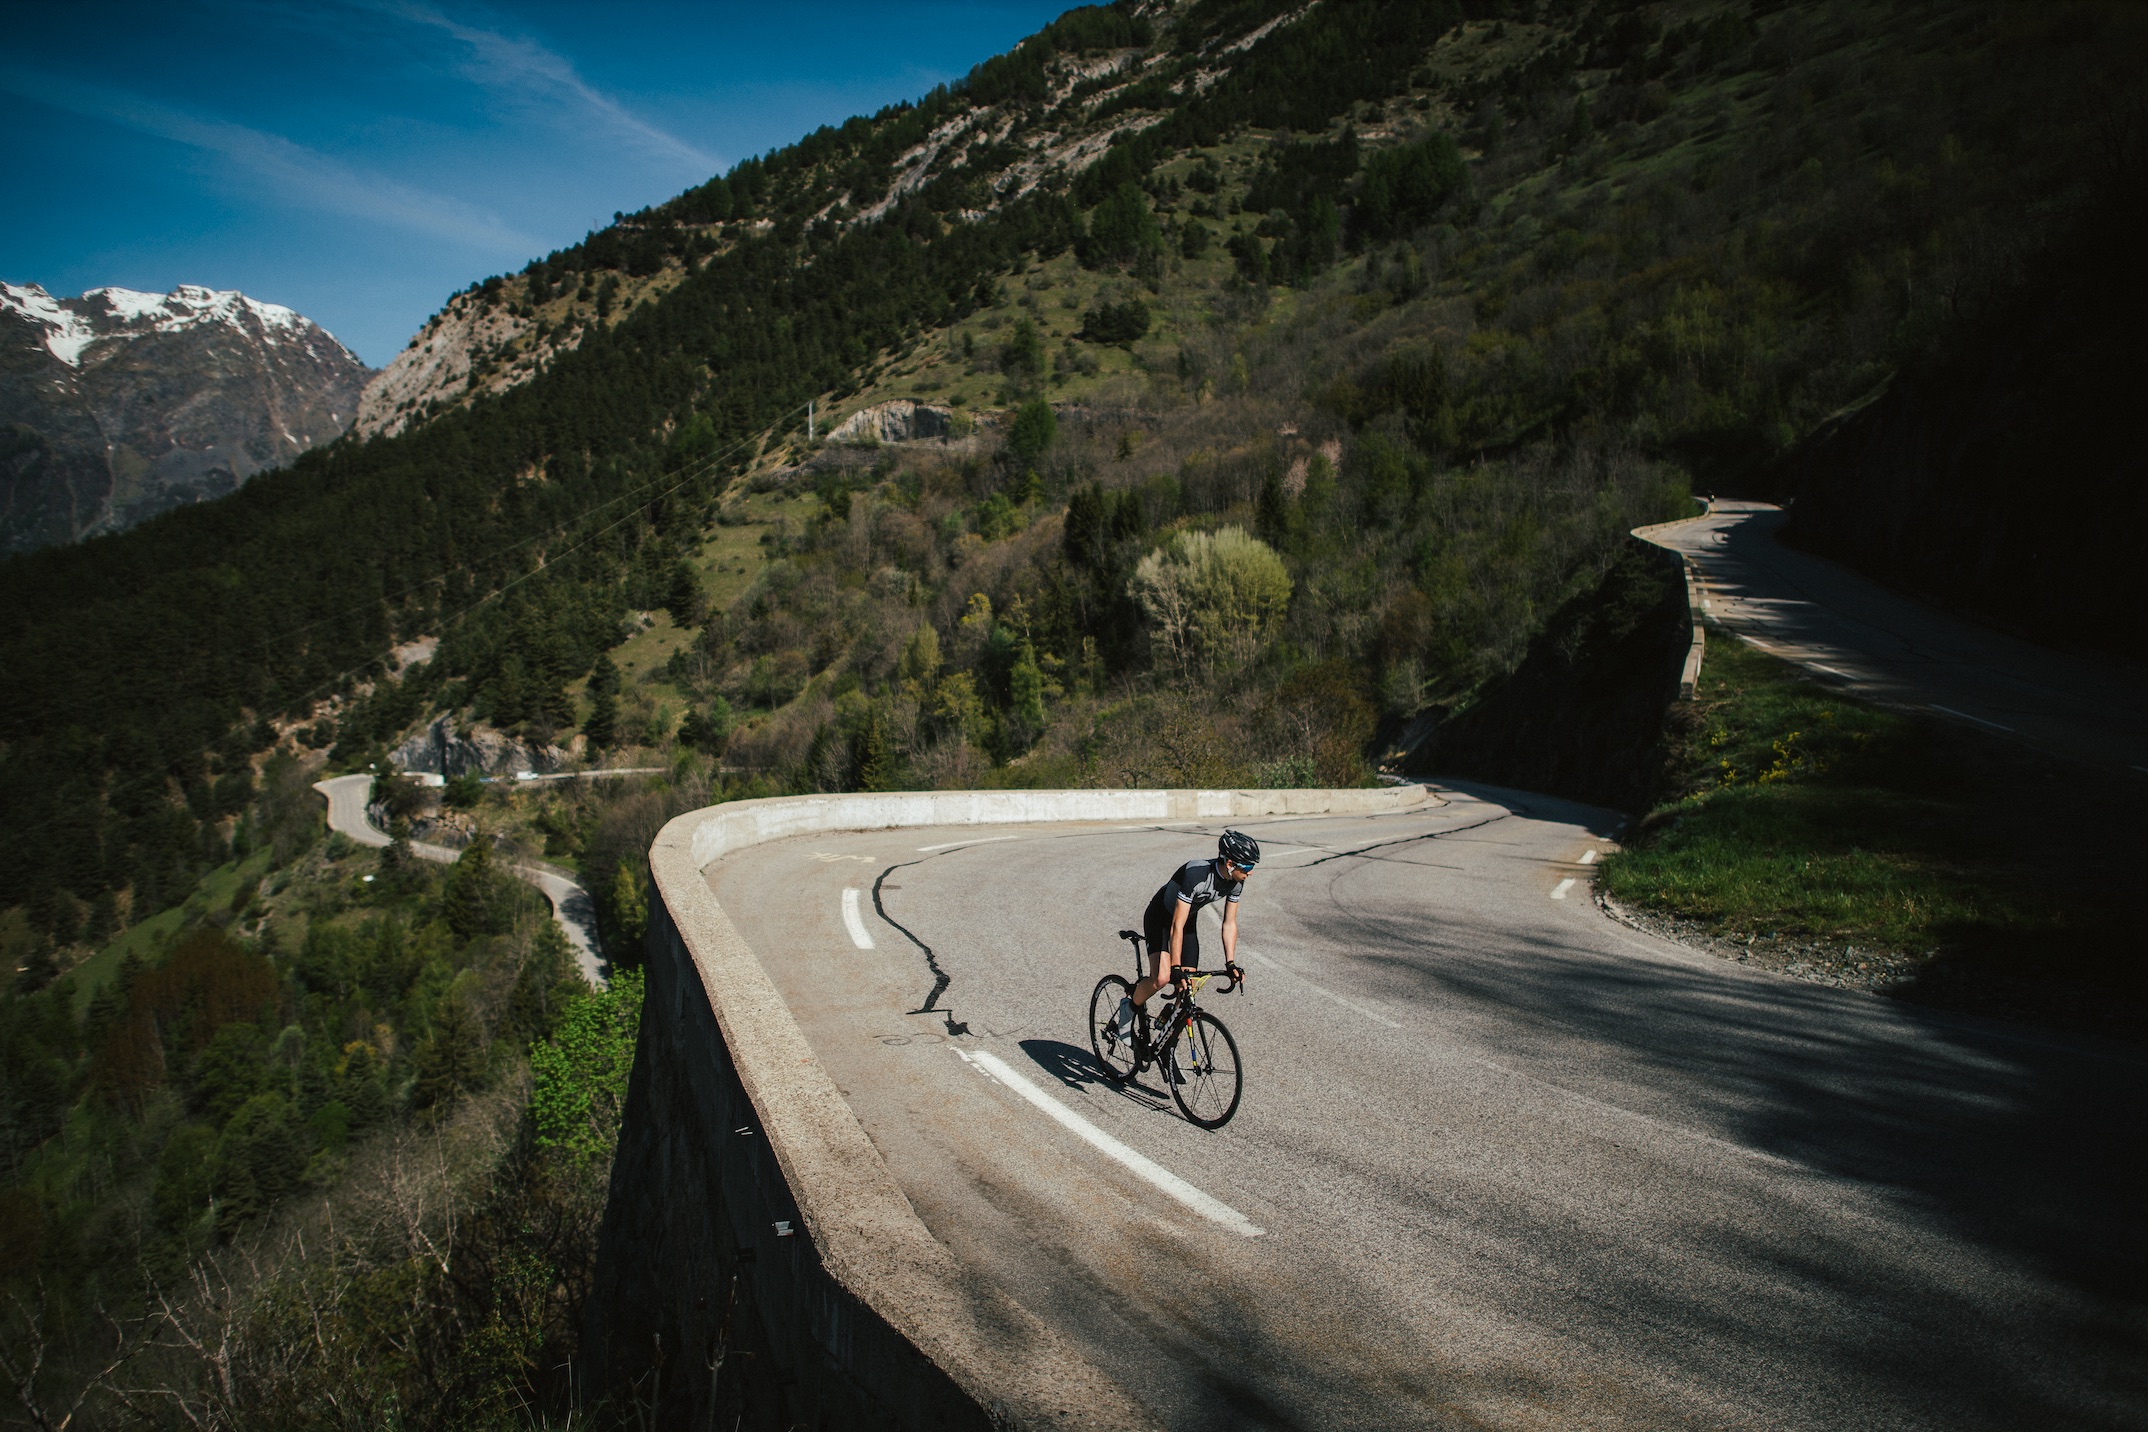 A rider climbs a road in a mountainous area.